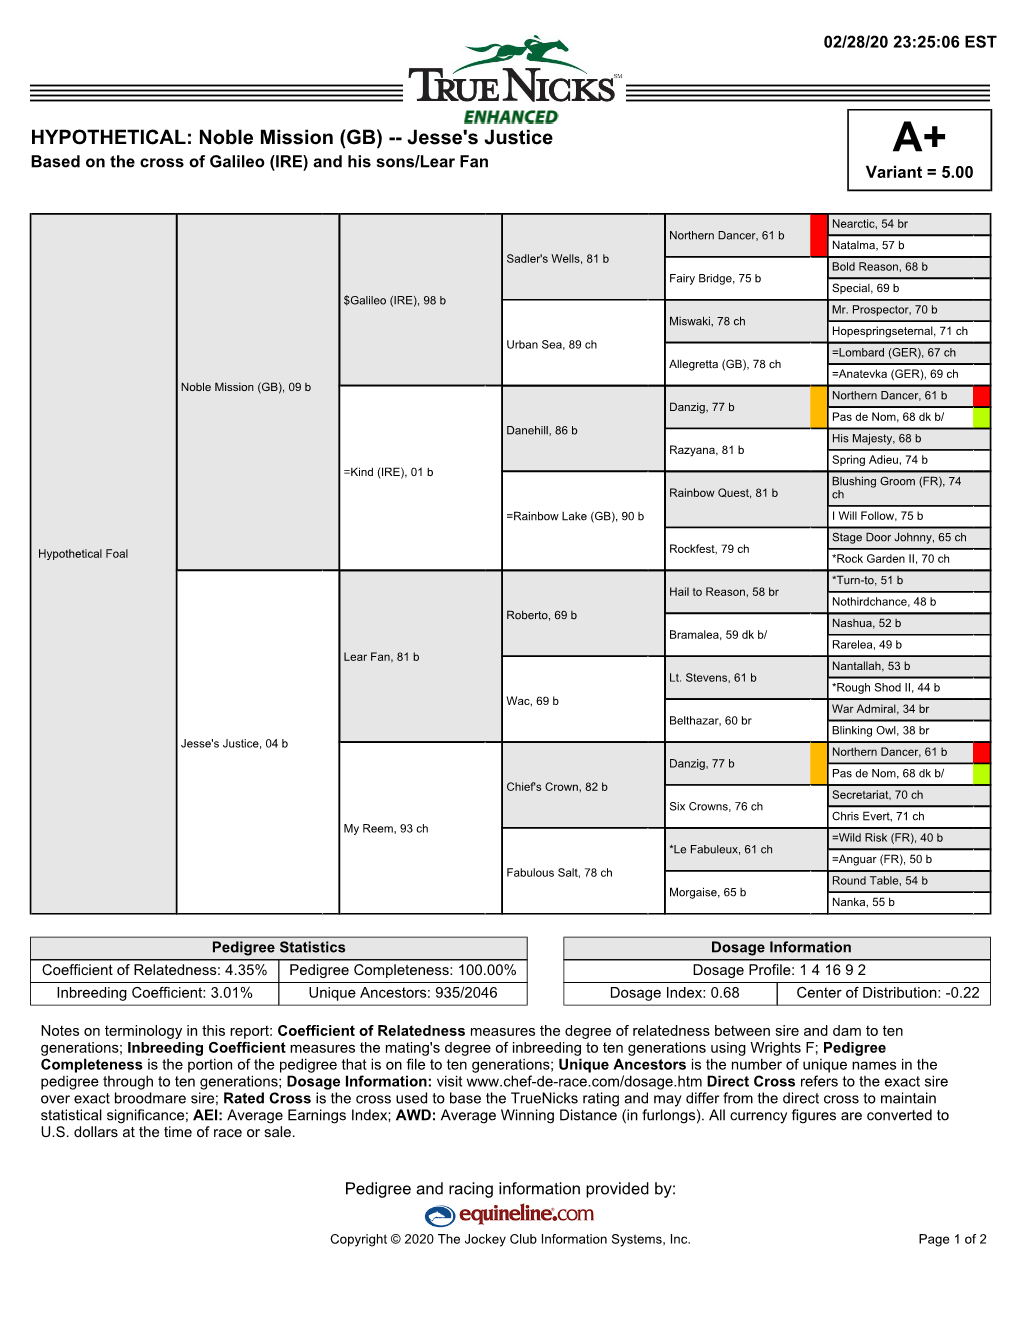 Noble Mission (GB) -- Jesse's Justice A+ Based on the Cross of Galileo (IRE) and His Sons/Lear Fan Variant = 5.00